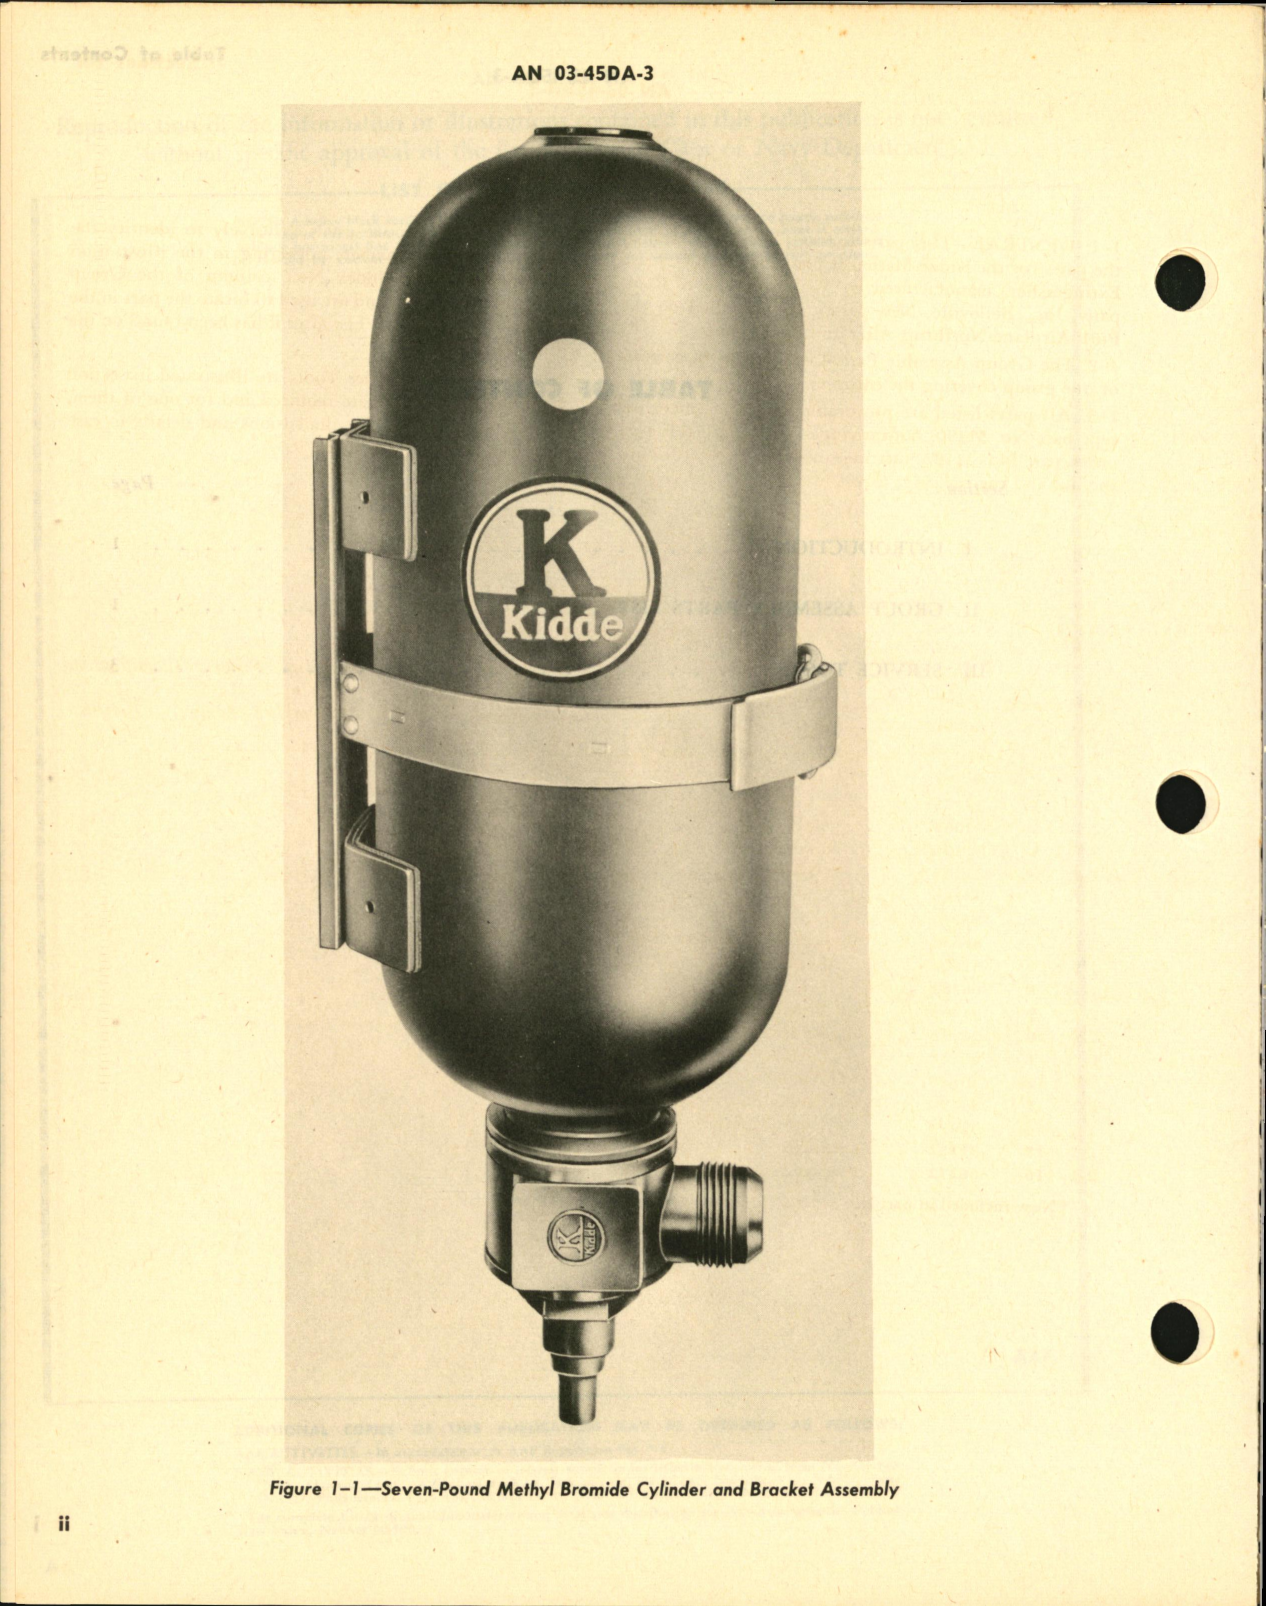 Sample page 4 from AirCorps Library document: Parts Catalog for Methyl Bromide Fire Extinguisher